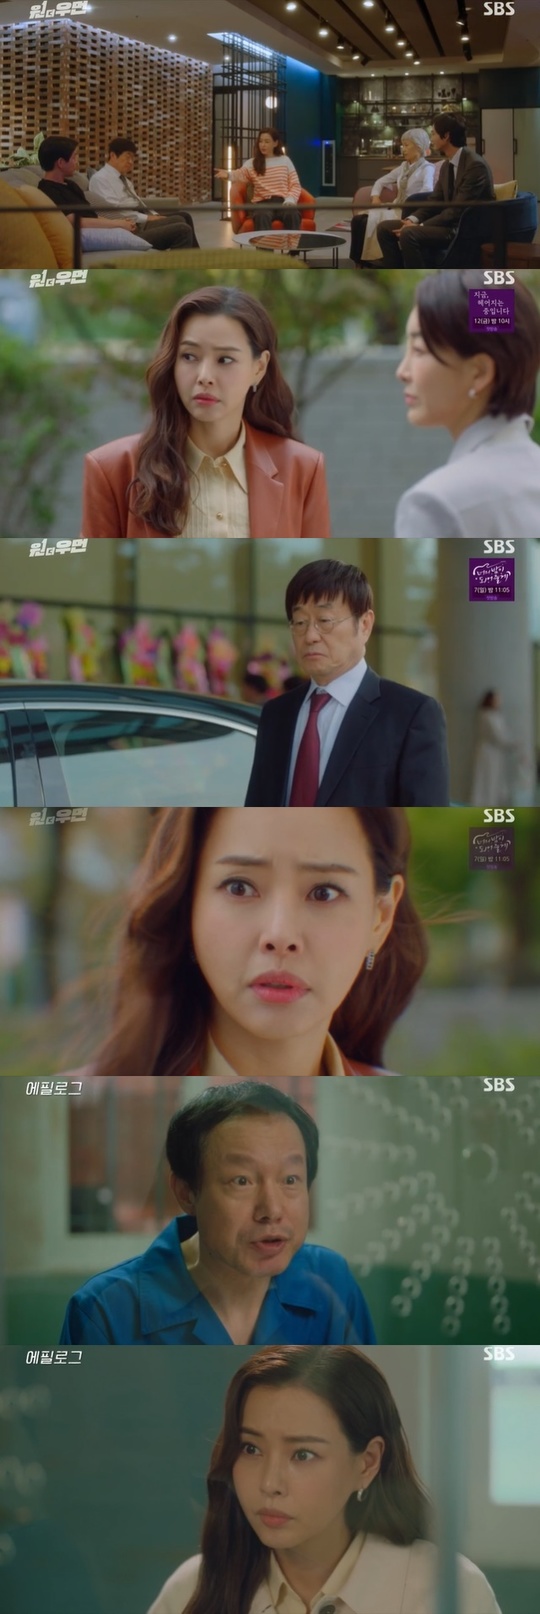 With Kim Chang-wan decorating the shocking betrayal ending, viewers have been focused on whether the introduction of the double Sky will be a rice cake.In the 15th episode of SBS gilt drama One the Woman (played by Kim Yoon and directed by Choi Young-hoon), which was broadcast on November 5, the opposite fate of Han Sung-hye (Jin Seo-yeon), who won the Hanju group, and the supporting actor (Lee Ha-nui), who is dismissed from the prosecutors office and loses multiple power, was portrayed.On this day, Cho succeeded in saving Kang Mi-na (Lee Hwa-gyeom), who returned from molding in Han Sung-hyes hand, but soon fell into crisis again.Kang Mi-na was hit by a triangular wave that followed her and fell unconscious, and the supporting actor was trapped in a detention center on charges of impersonating Kang Mi-na.Even Cho Yeon-ju was stripped of his inspection clothes by Ryu Seung-deok (Kim Won-hae).Since then, Cho Yeon-ju has been released after being dropped from the charges in exchange for handing over all of the shares and powers of Yumin Group, which was delegated by Han Seung-wook (Lee Sang-yoon), but revenge seemed to be not easy as long as he lost his prosecutors title.Then, in an unexpected place, the opportunity came.Han Sung-hye, who was afraid that Han Young-sik (the former National Director) would hit him even after taking the position of chairman of the Hanju Group, touched Kim Isa (Kim Kyung-shin, the former president of Jesuits), and made Kim put down his neutral position that he had been sticking to throughout.Kim brought a pen-shaped eavesdropping recorder to Han Seung-wook, which Han Young-sik had ordered to bring.The recorder contained all the truths of the moment Han Seung-wooks father died 14 years ago.Han Young-sik, who did not believe Han Sung-hye at the time, was a wiretap recorder installed in her daughters belongings.Han seung-wook and Cho Yeon-ju discussed how to use this evidence with Roh Hak-tae (Kim Chang-wan), Ahn Yoo-joon (Lee Won-geun), and Kim Isa.However, on the day of the plan, Roh Hak-tae was strangely unreachable. At the time when everyone was frustrated, Han Sung-hye arrived at the company.Before entering the inauguration ceremony, Han Sung-hye approached the place where the supporting actor put the car and smiled comfortably and showed the eavesdropping recorder that Roh Hak-tae took.Soon, Noh Hak-tae appeared in Han Sung-hyes car and surprised the supporting actor by informing him of betrayal.Han Sung-hye threatened and repented Roh Hak-tae, who had ignored the Hanju fashion account book that was manipulated 14 years ago, and the situation that the current accident was caused by many families.This situation has raised the curiosity of viewers whether the old school has betrayed the supporting actor and the Han Seung-wook, or is still playing double spy again.